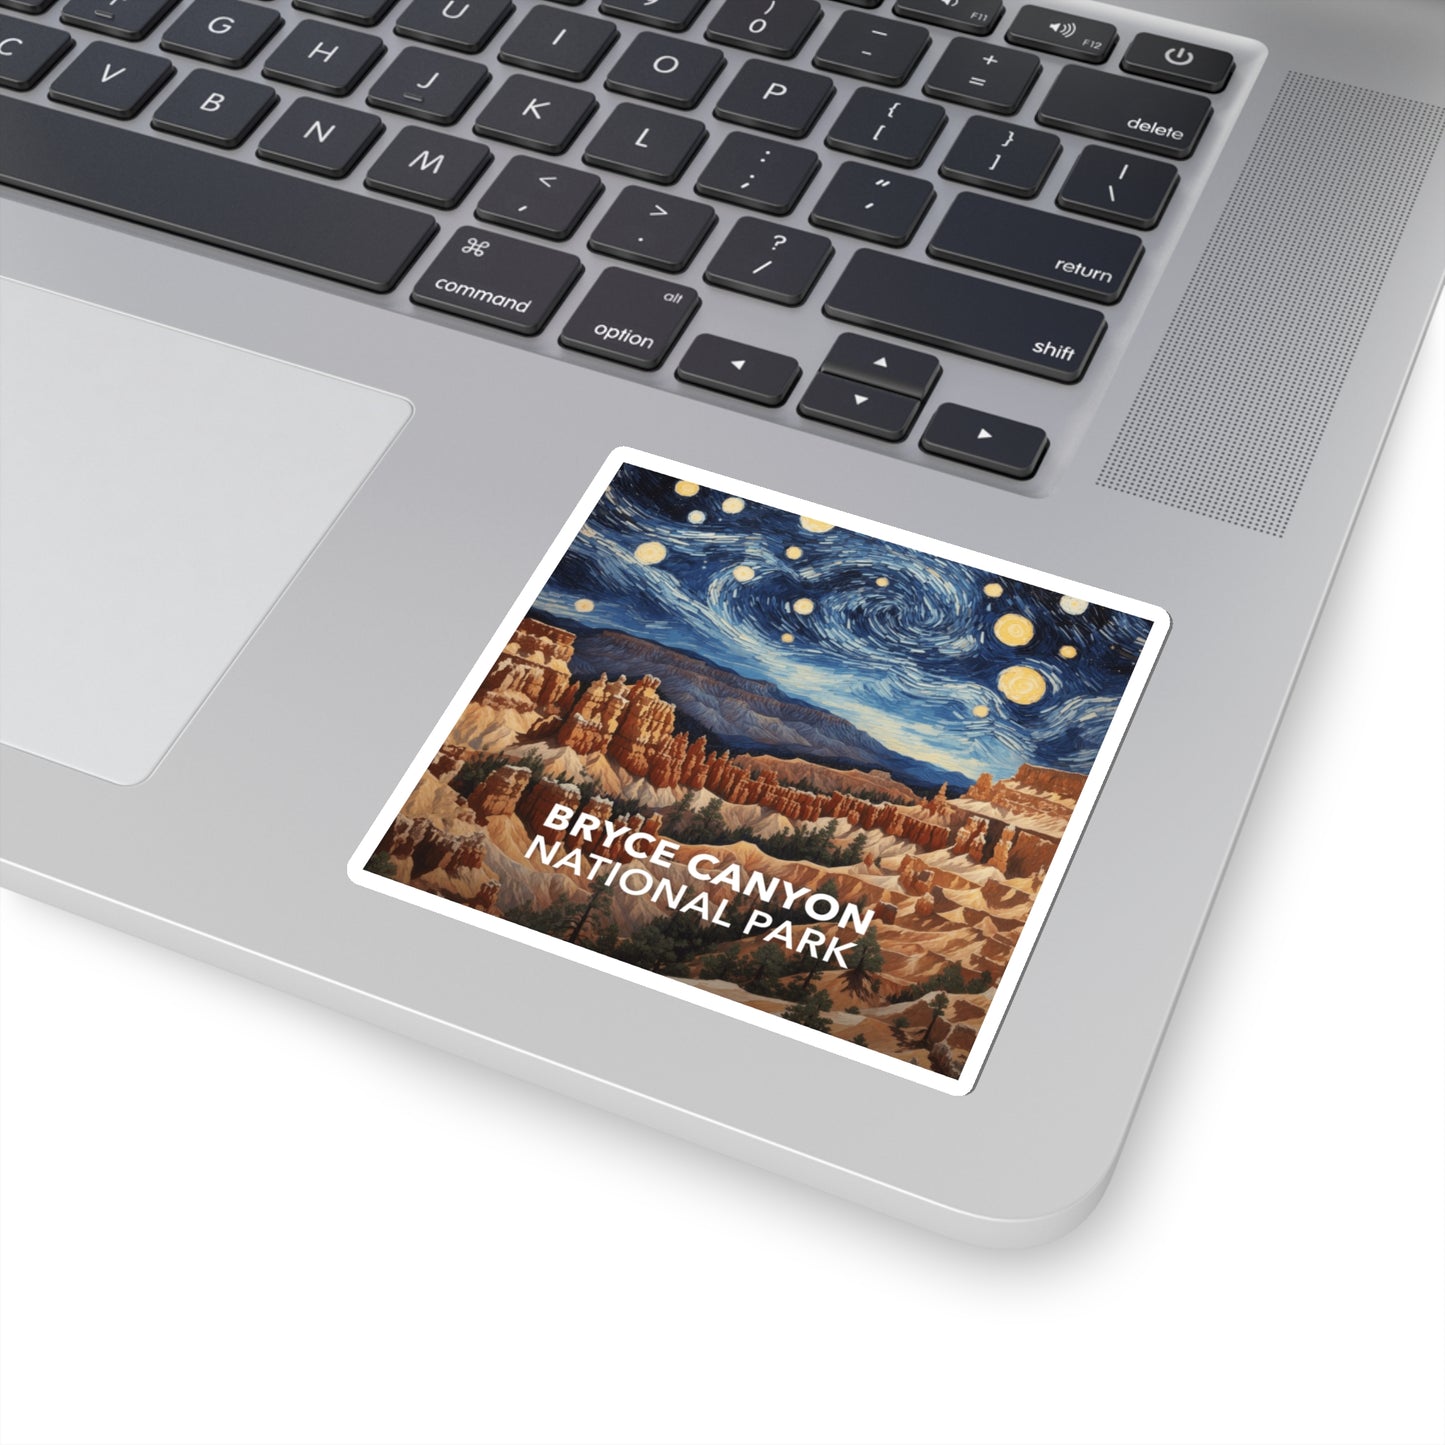 Bryce Canyon National Park Sticker - The Starry Night